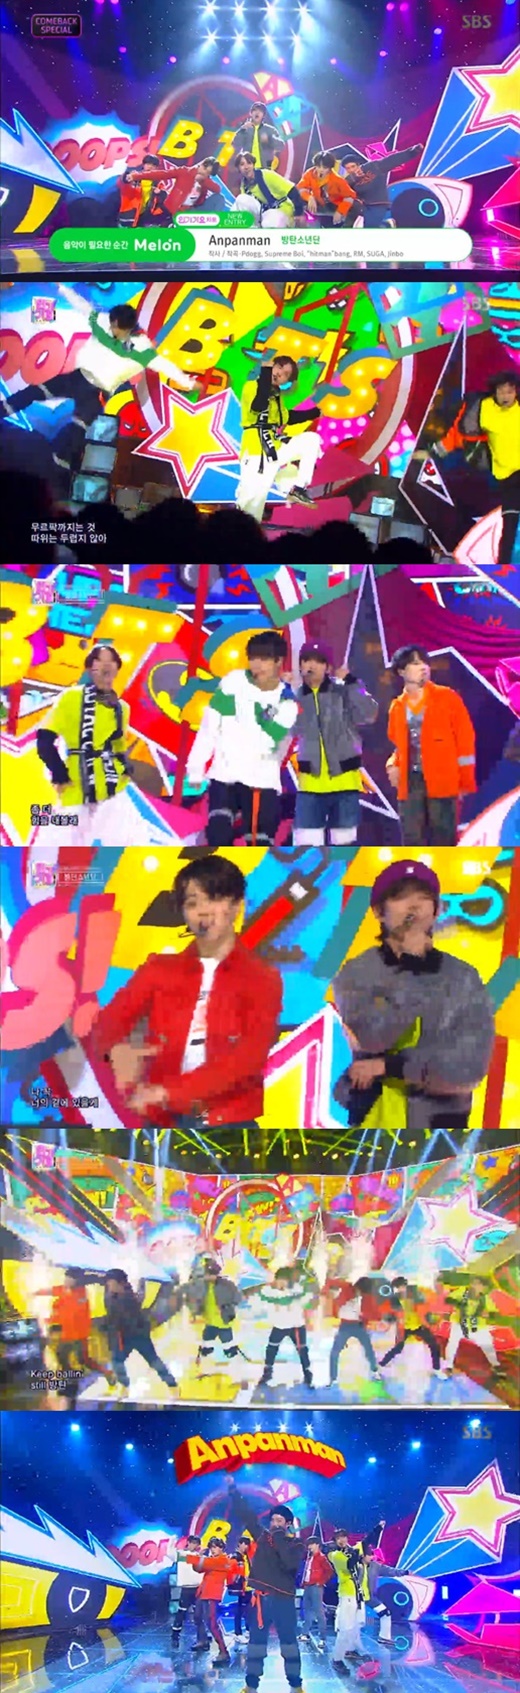 The group BTS made a comeback.On SBS Inkigayo song broadcasted on the 27th, BTS appeared and performed the title song Fake Love following the songs Anpanman and Airplane!! Part 2.On the stage of Anpanman, BTS drew attention with its youthful style of primary color coordination, with its youthful, cute choreography and Performance as it fits the style.In the Airplane!! Part 2 stage, it boasted a completely different atmosphere.In Airplane!! Part 2, a song that contains the candid feelings felt by the members of the world through the world tour, a free and sexy image attracted attention.In the last show, Fake Love, BTS charisma was outstanding, with more mature stage manners, sword dances and Performances.The title song Fake Love is a song of the aunt hip-hop genre in which Grunge Rock guitar sound and groovy trap beat create a strange gloomy, and it captures the sensibility of farewell with unique songs and sounds of BTS.On the other hand, Inkigayo Songs featured BTS, Winner, TinTop, Cross Jean, Lovelys, Enflying, Bigton, Ben, (Women) Children, The Eastlight, Canto, Khan, Spectrum and Gracie.